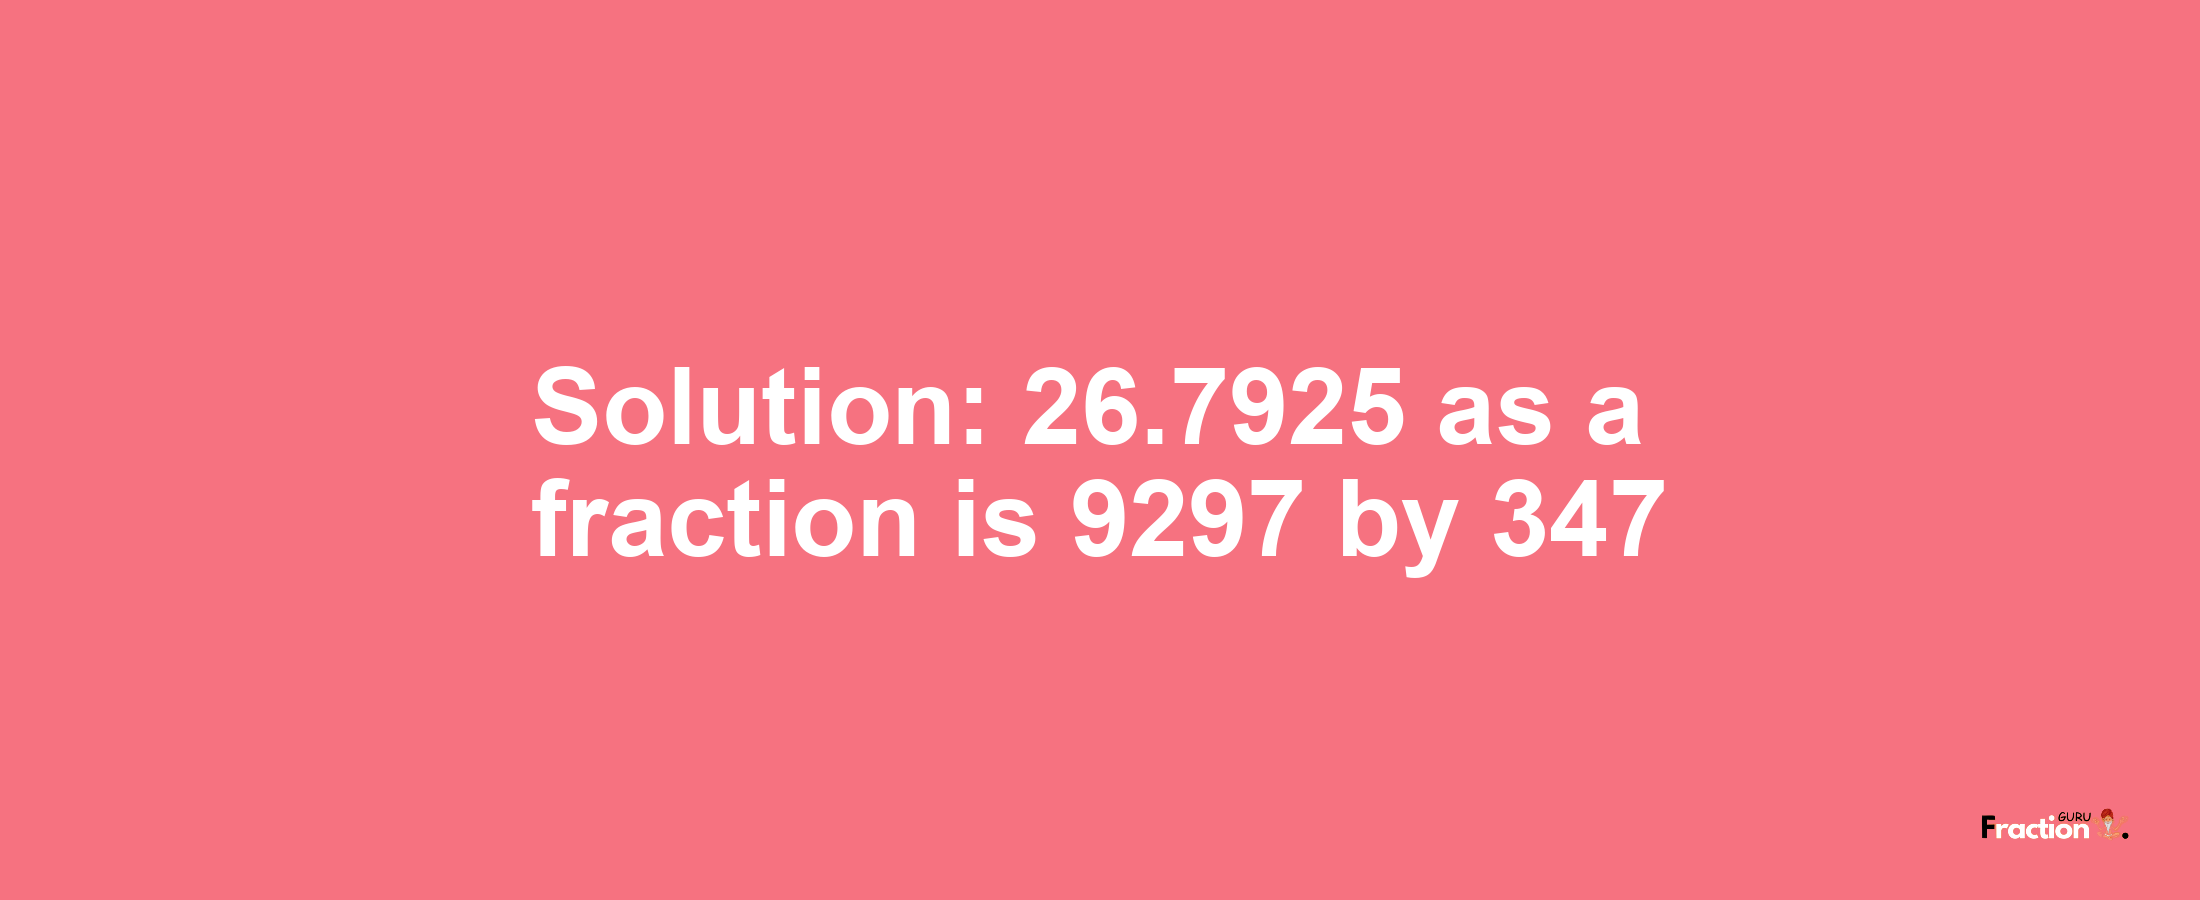 Solution:26.7925 as a fraction is 9297/347